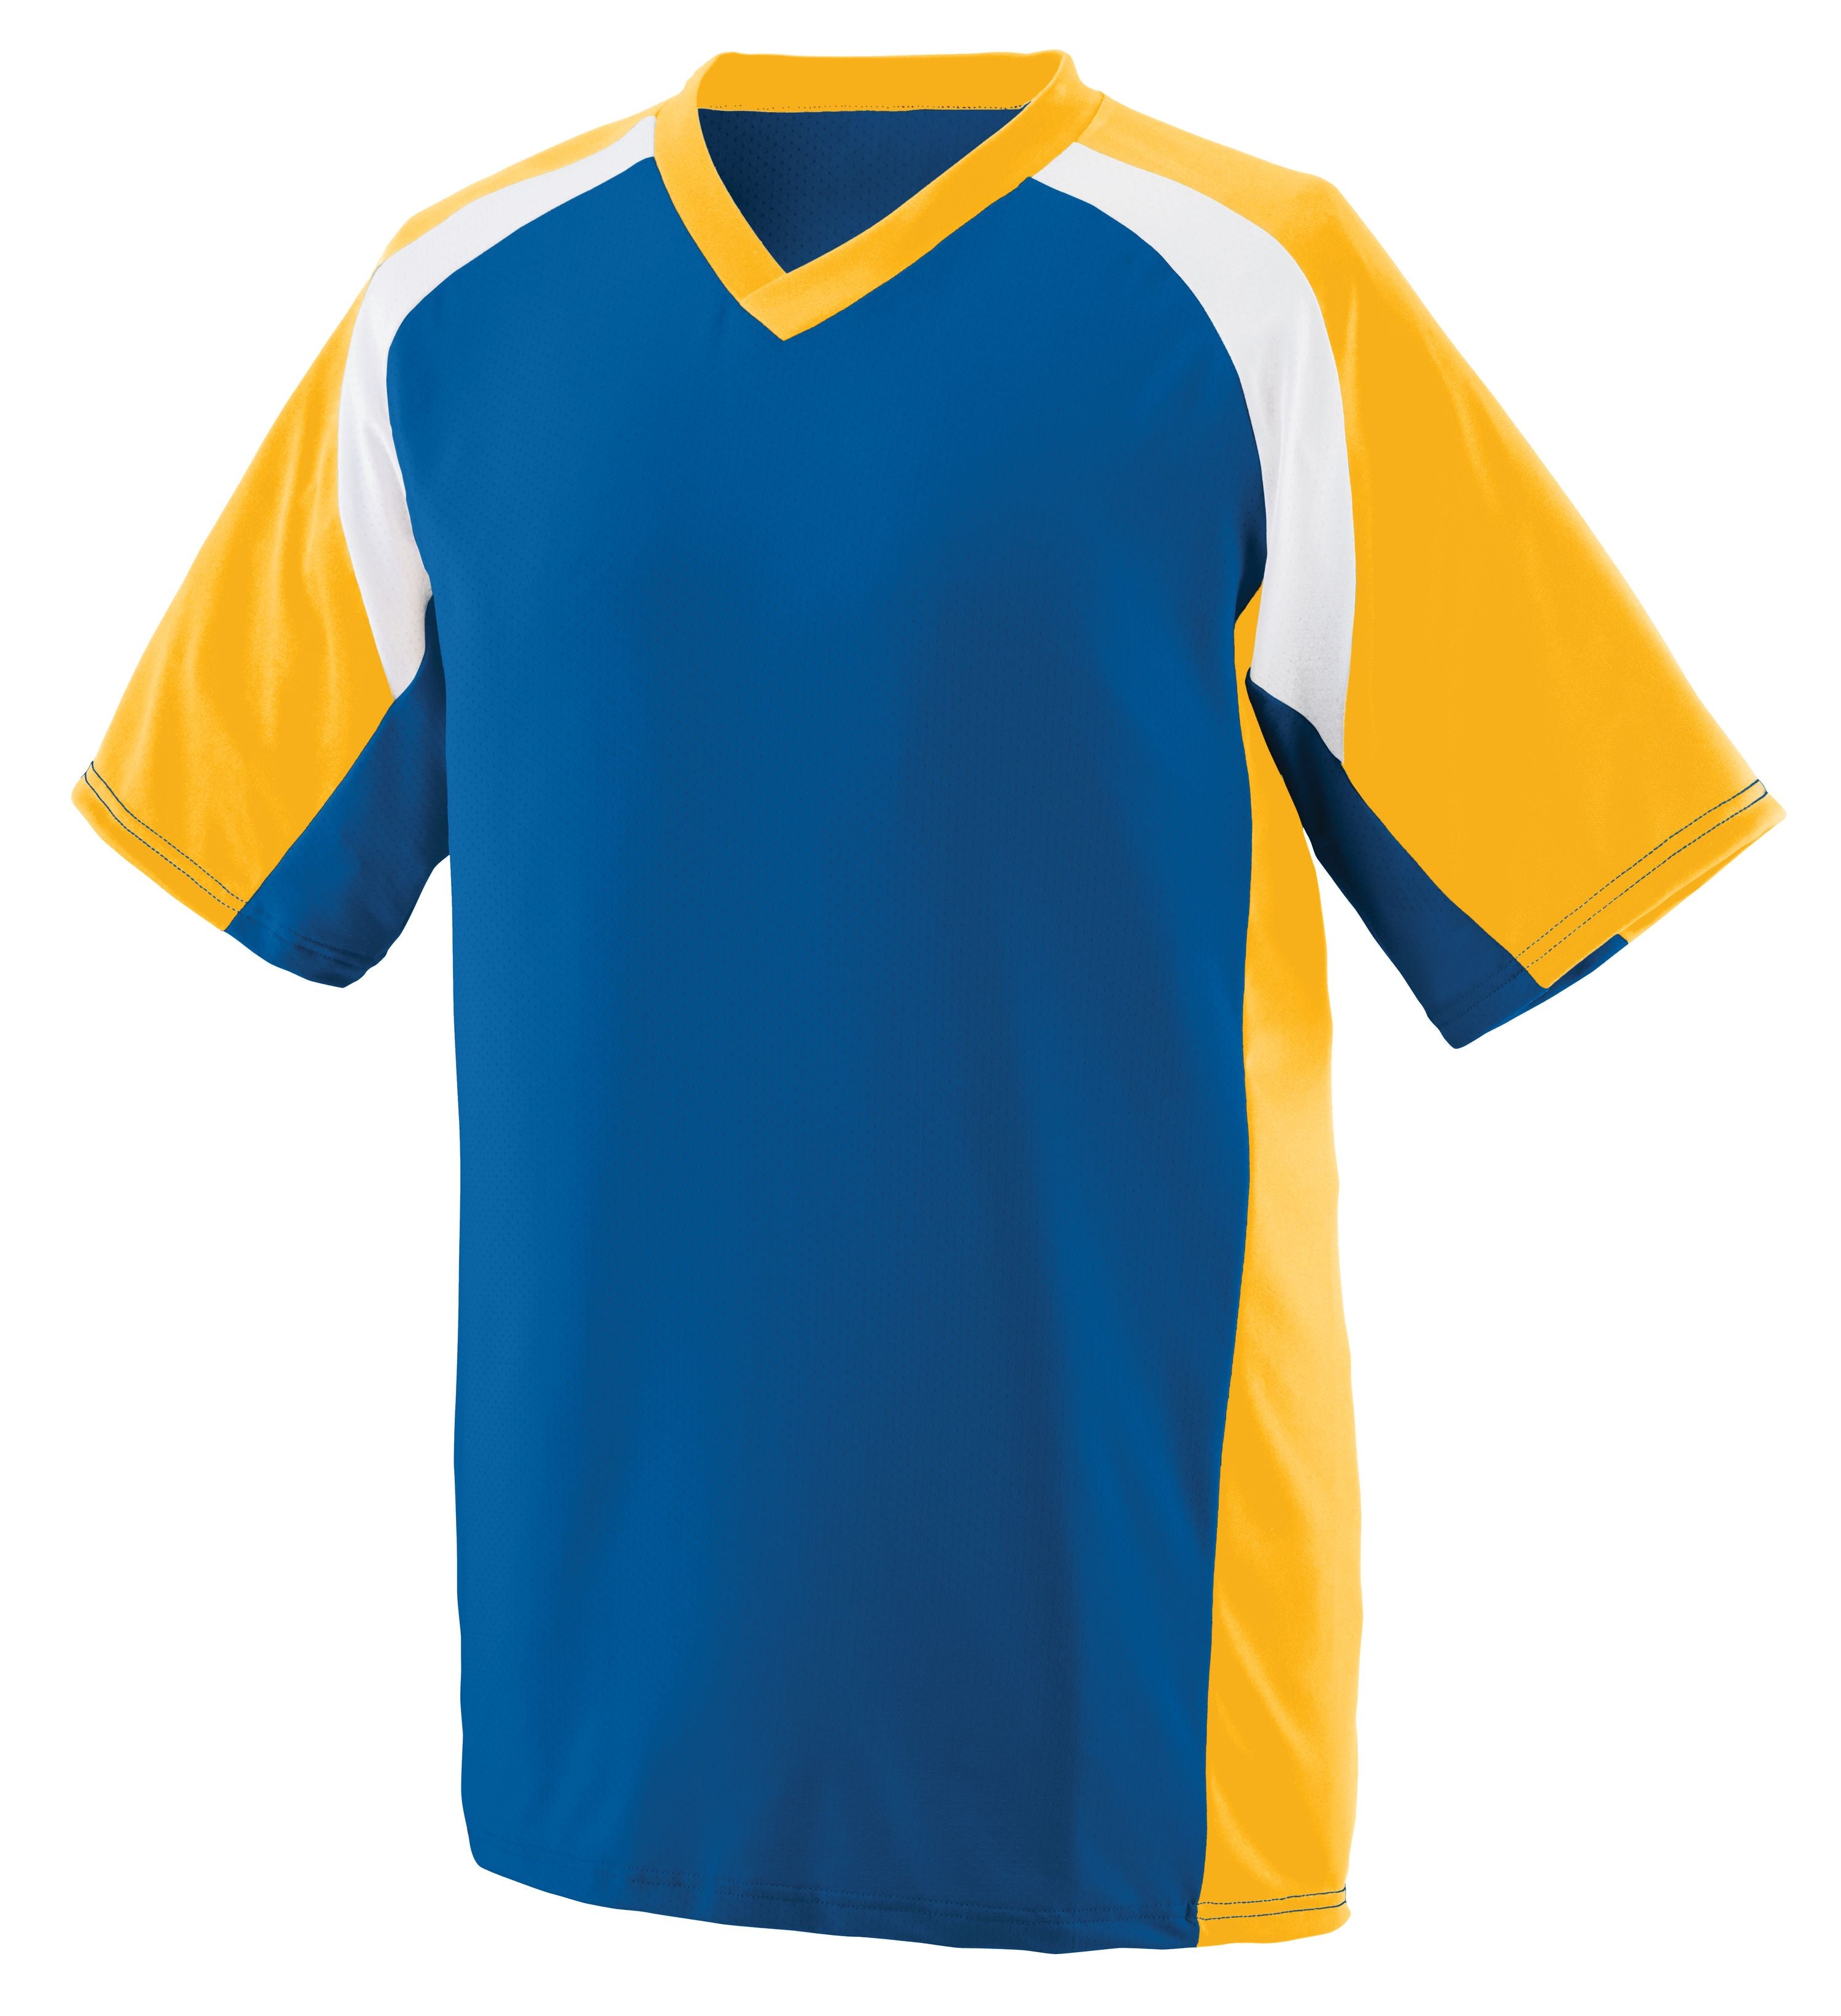 Augusta Sportswear Nitro Jersey in Royal/Gold/White  -Part of the Adult, Adult-Jersey, Augusta-Products, Football, Shirts, All-Sports, All-Sports-1 product lines at KanaleyCreations.com